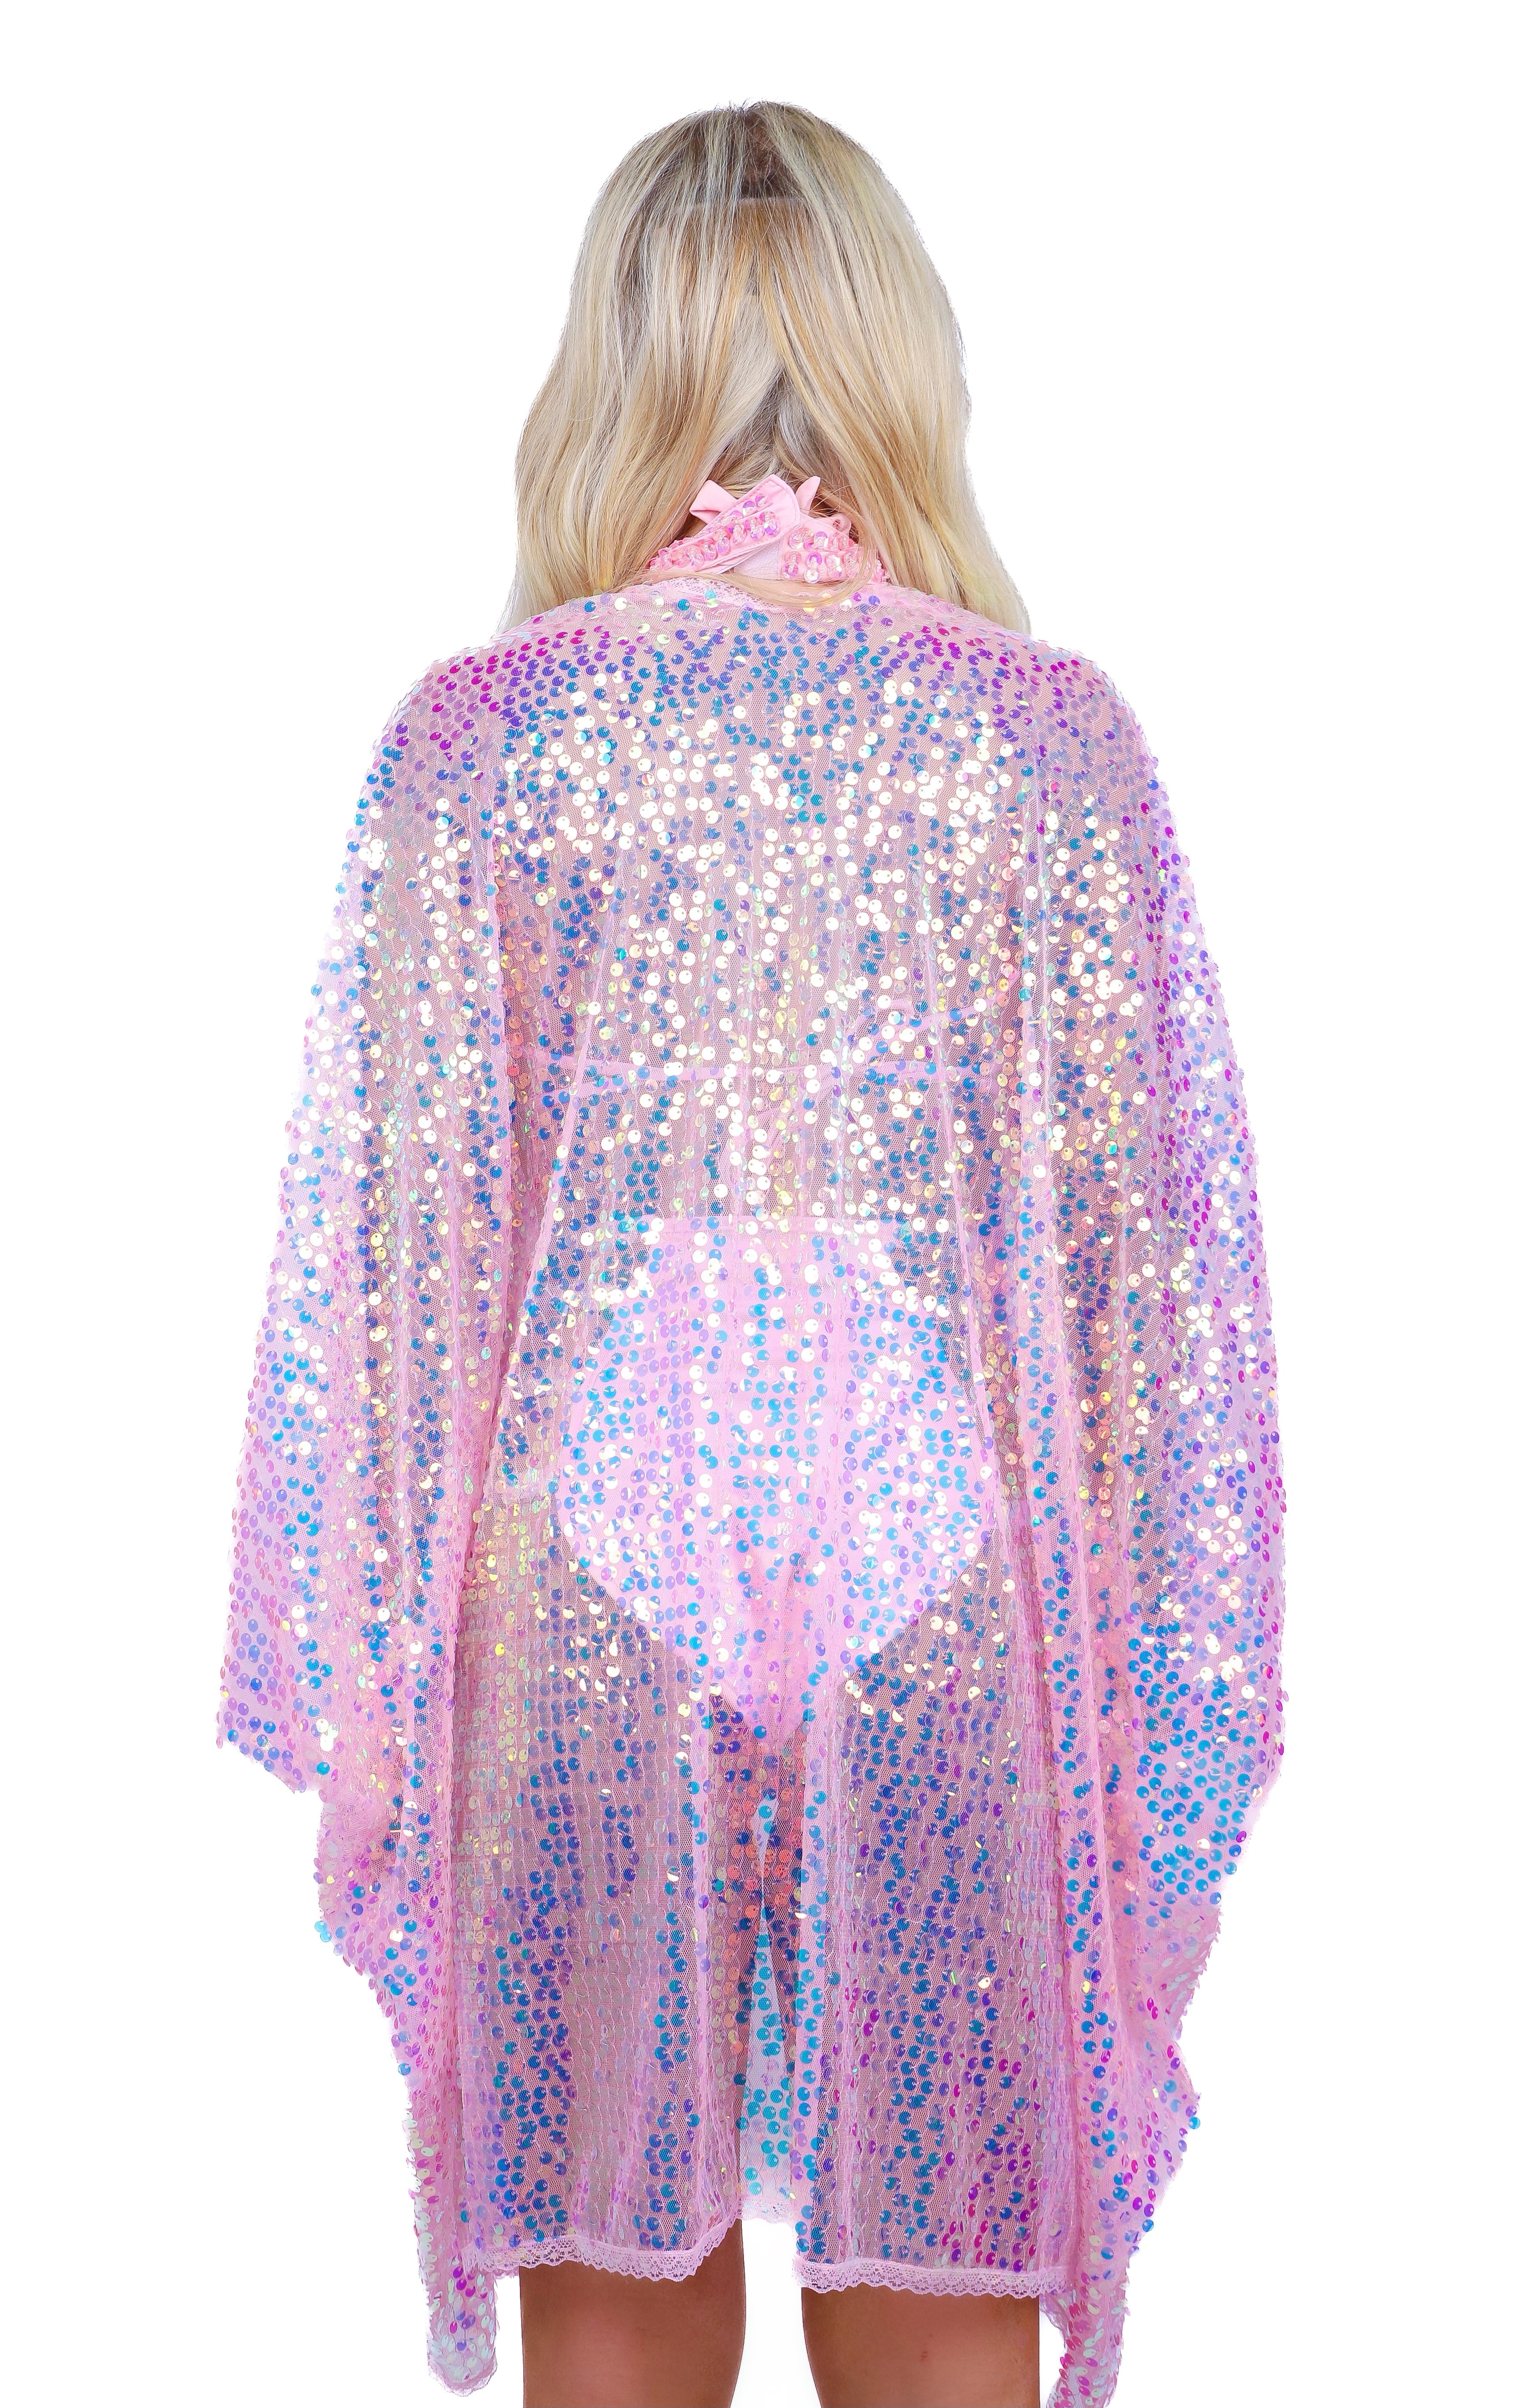 FULL OUTFIT- Pink Fantasy Sequin (4 pcs)